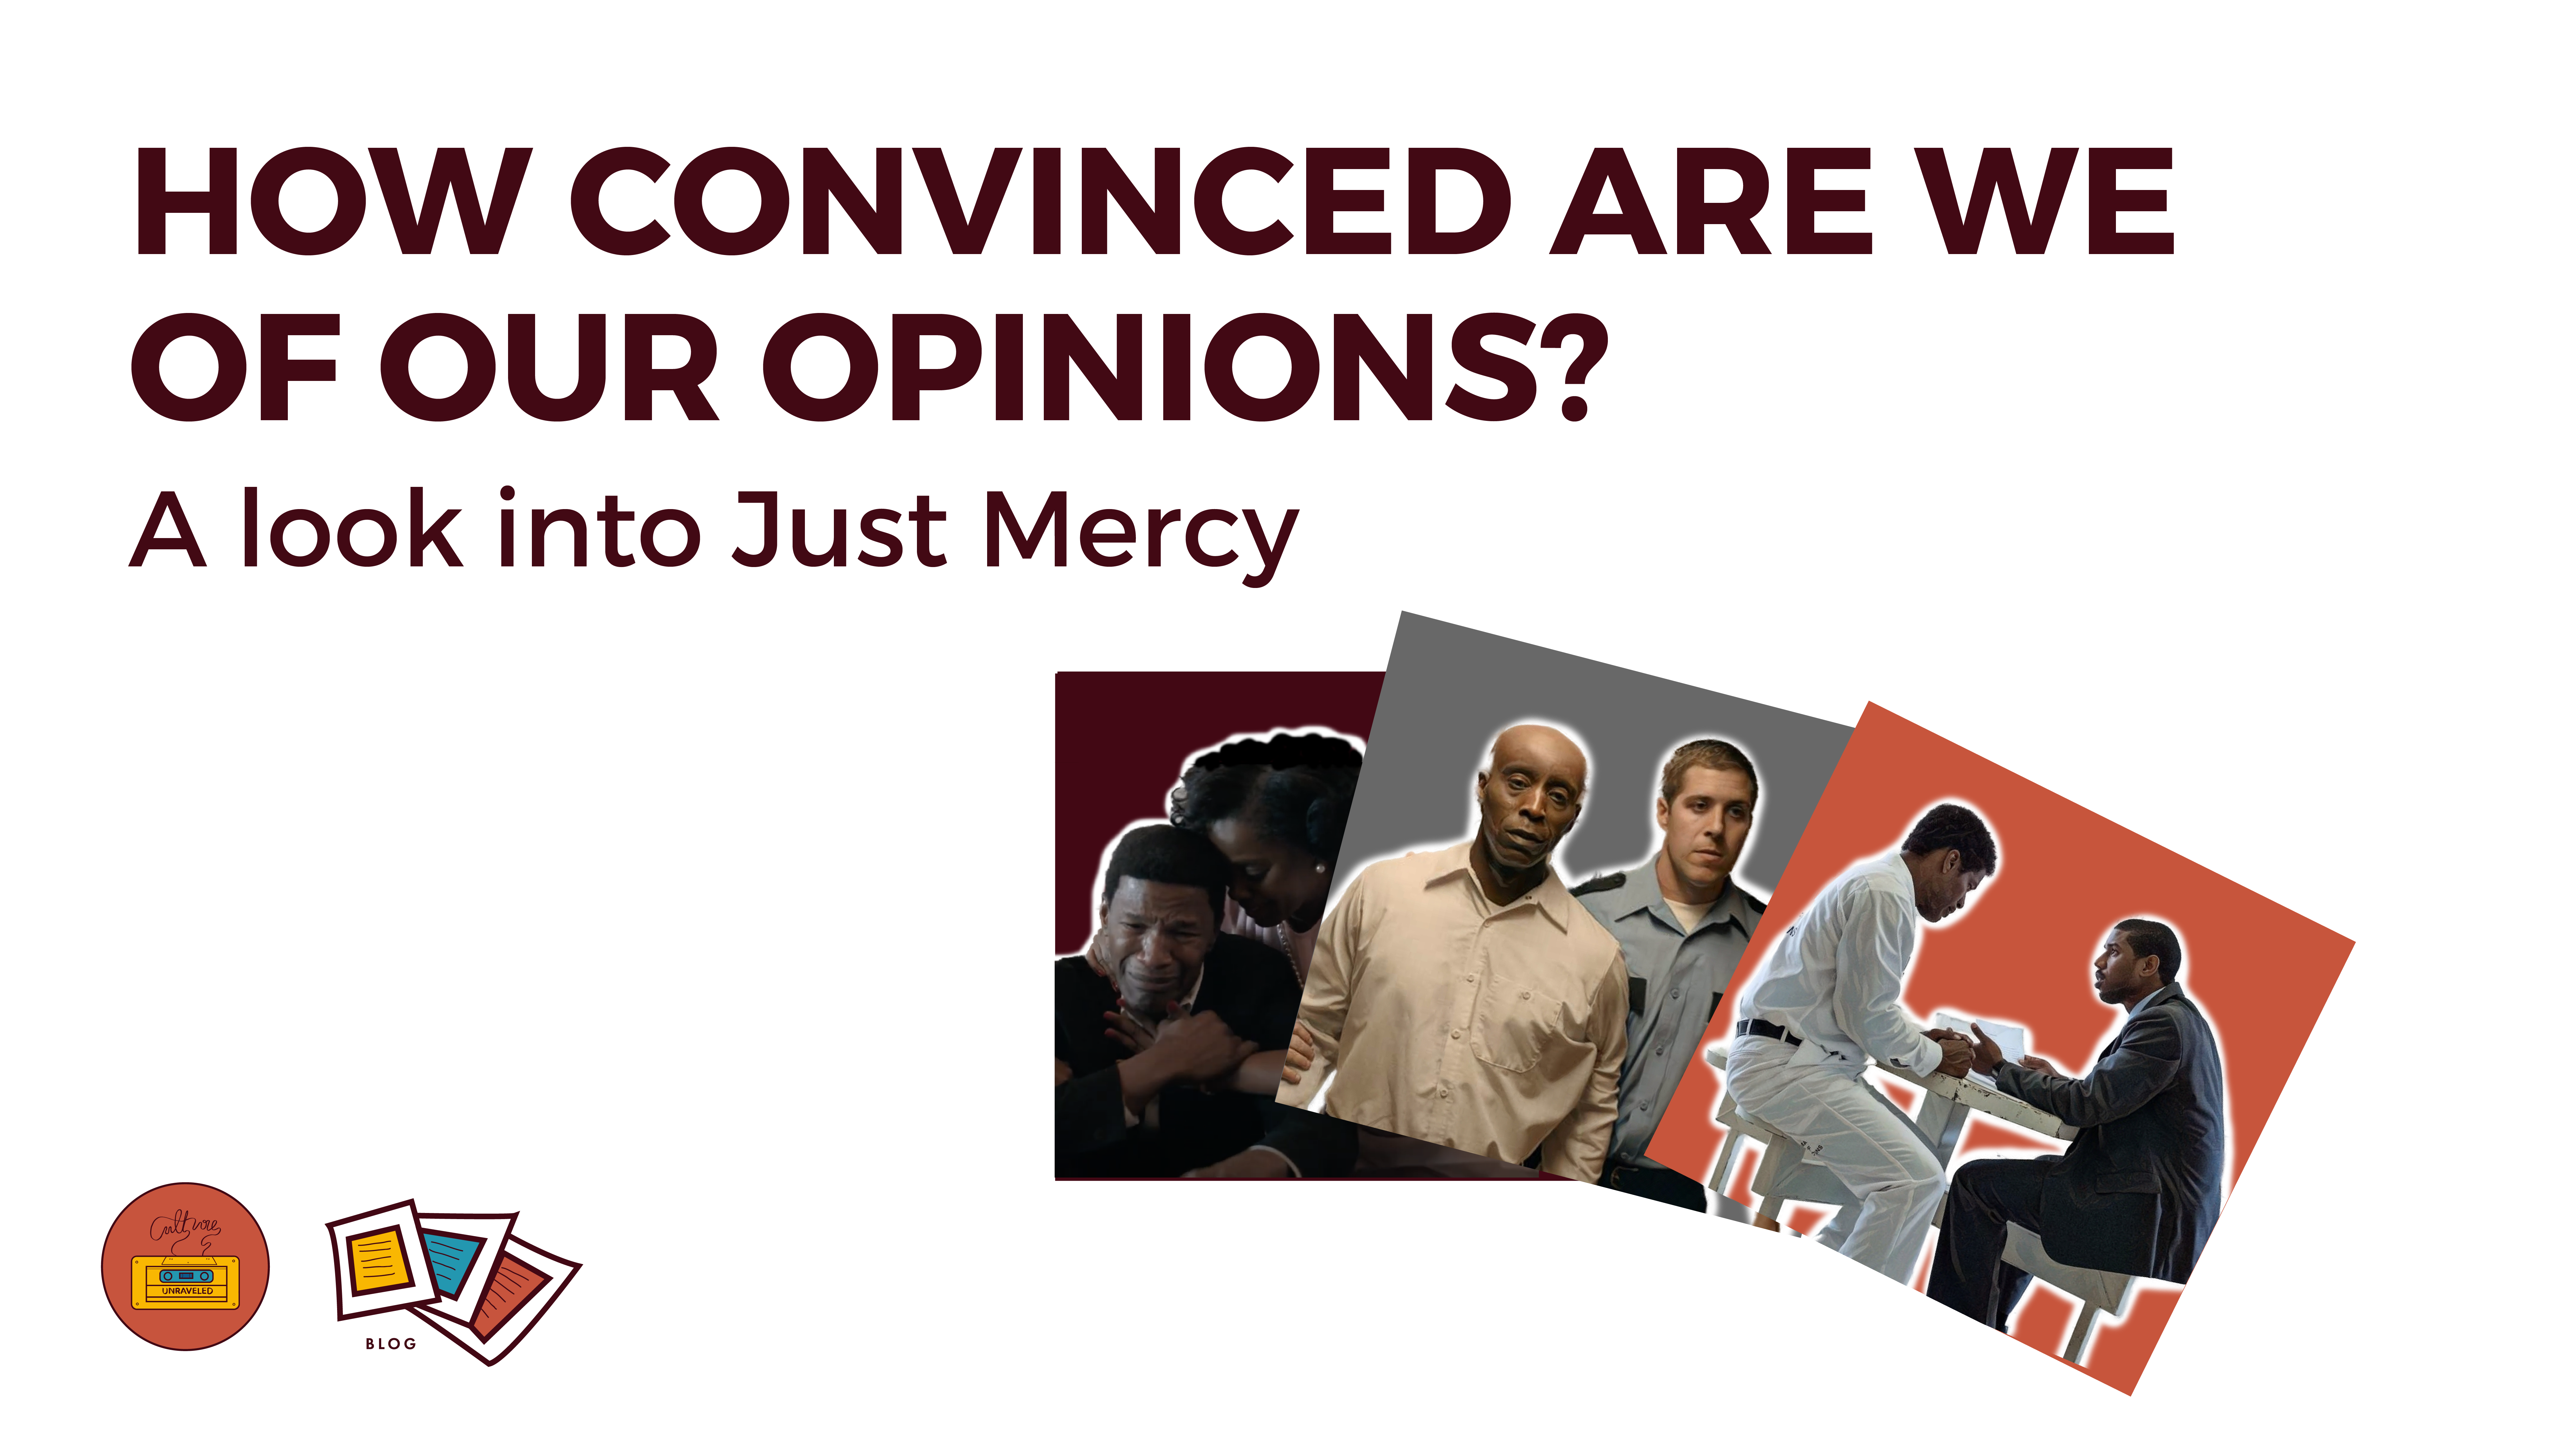 How Convinced are we of Our Opinions? A look into Just Mercy